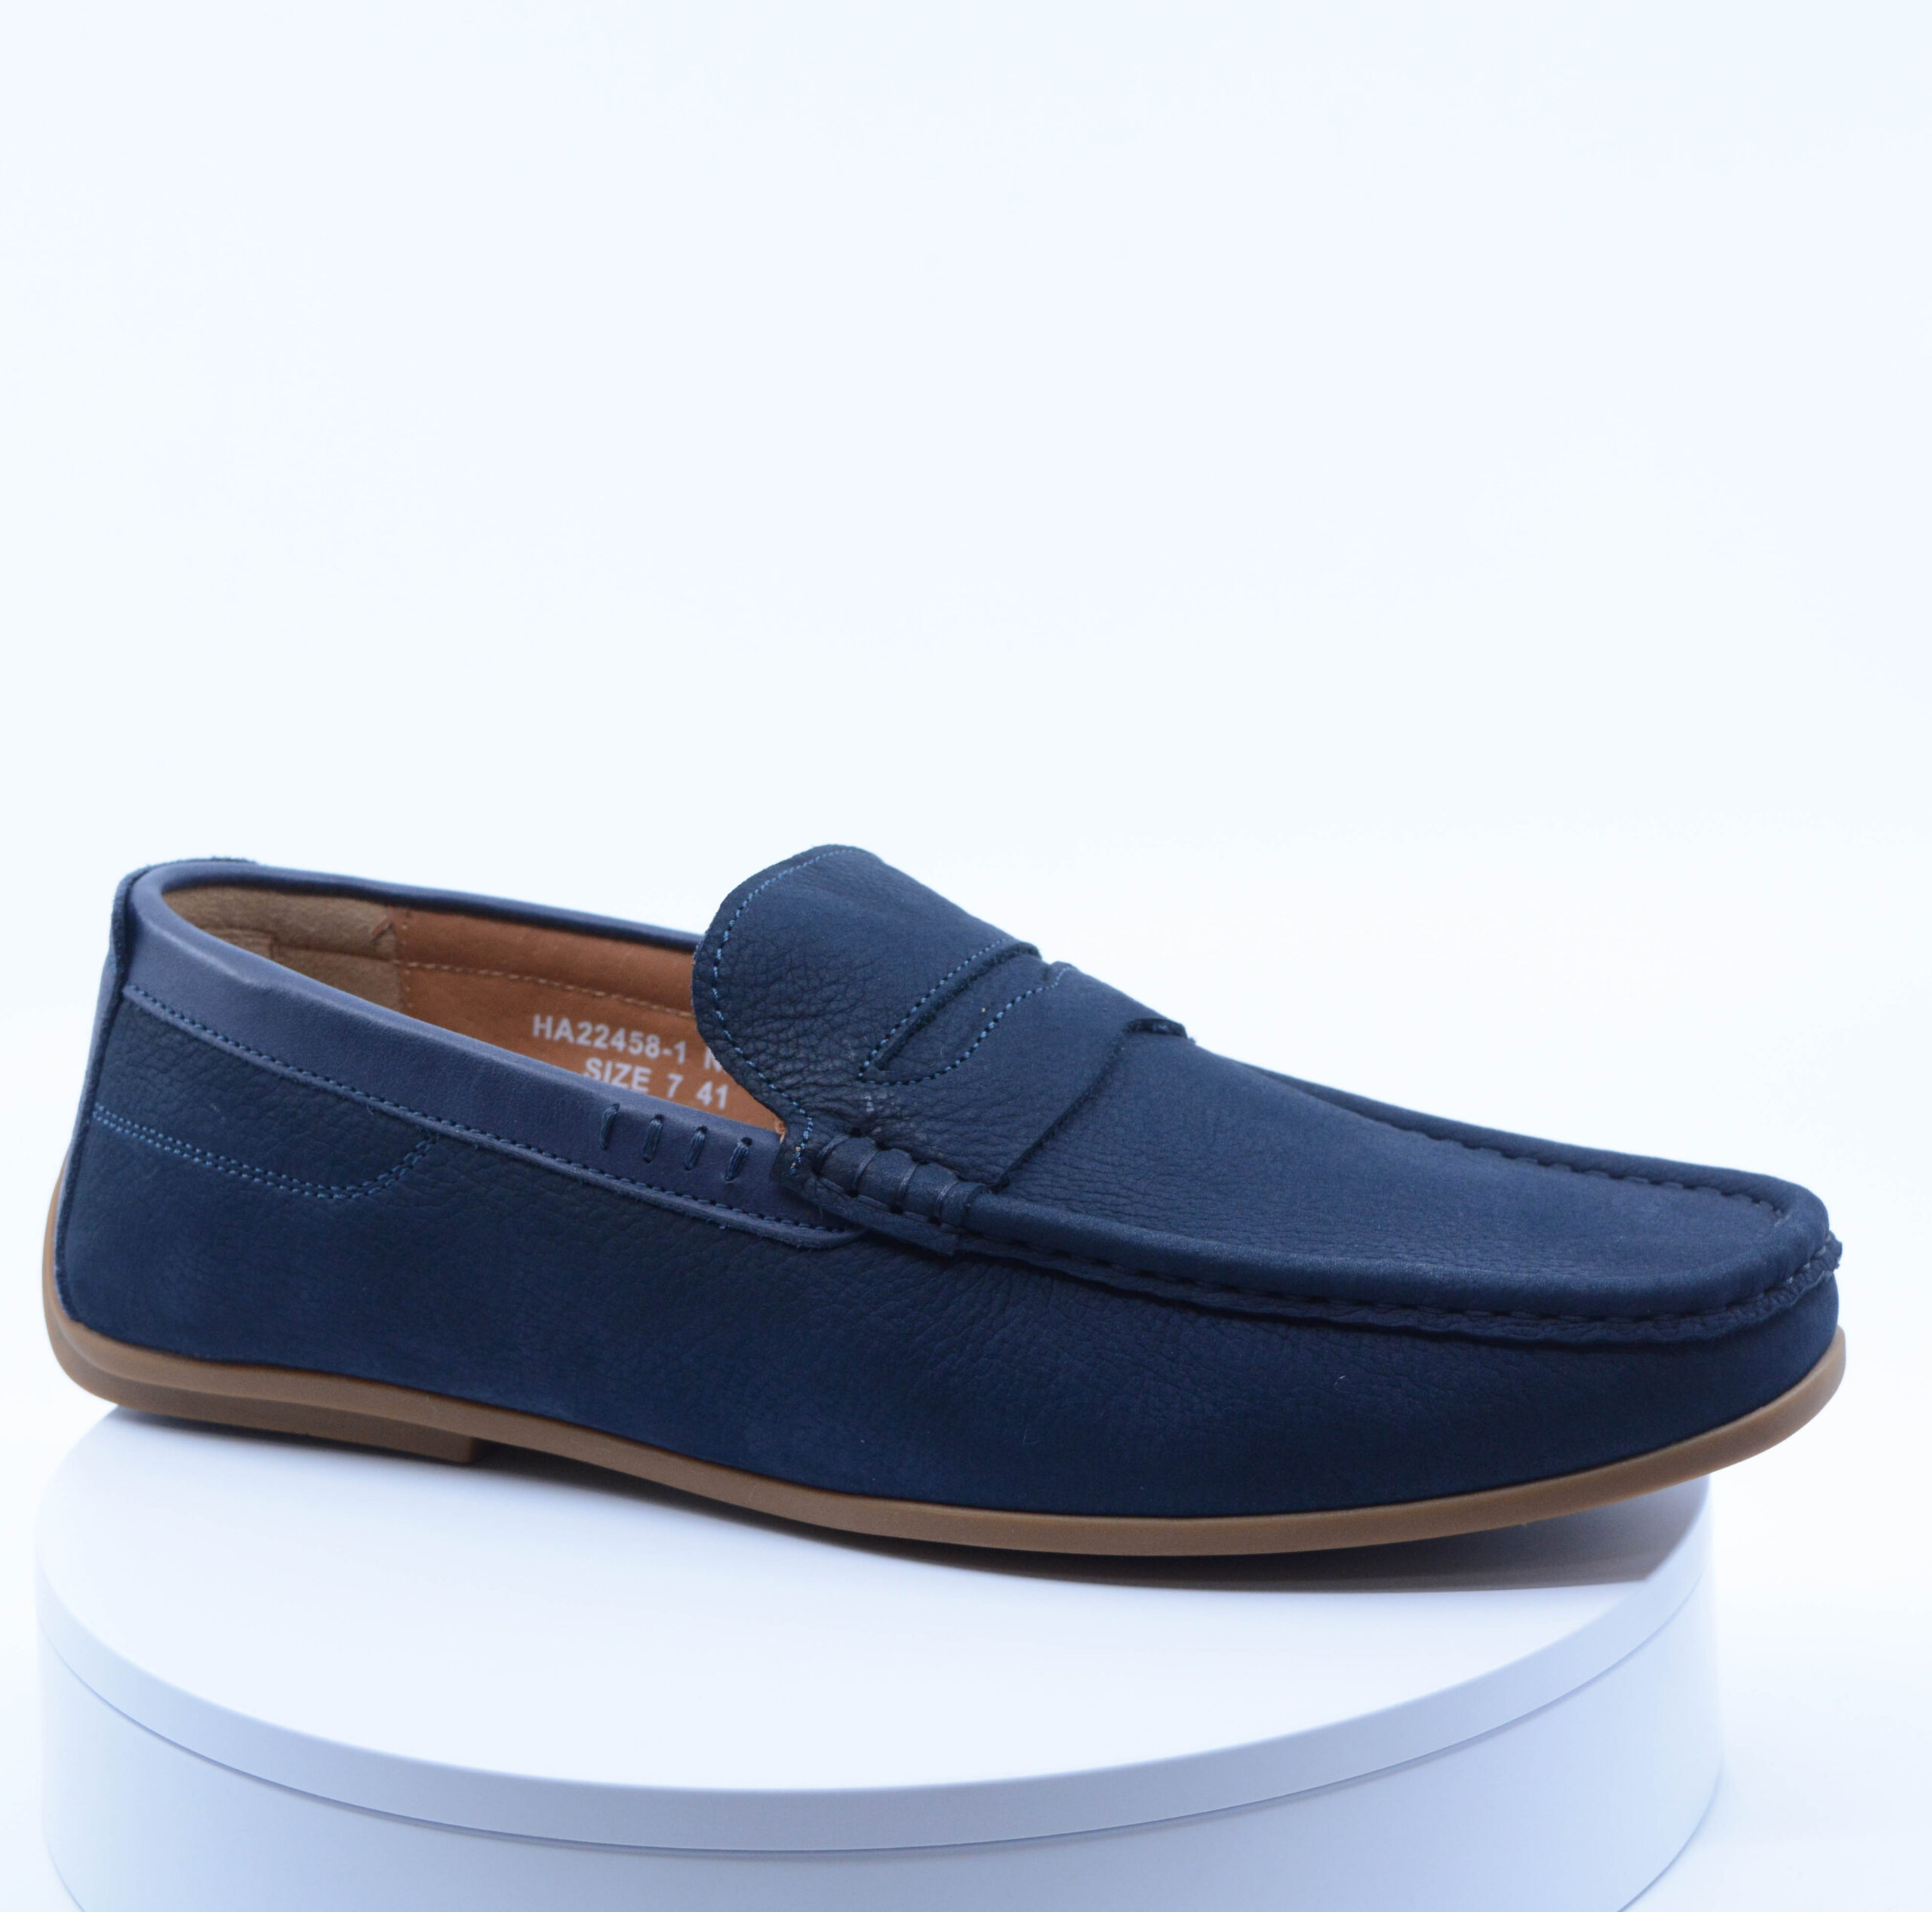 ARLO N PENNY LOAFER MOCCASIN - NAVY - Cain of Heswall